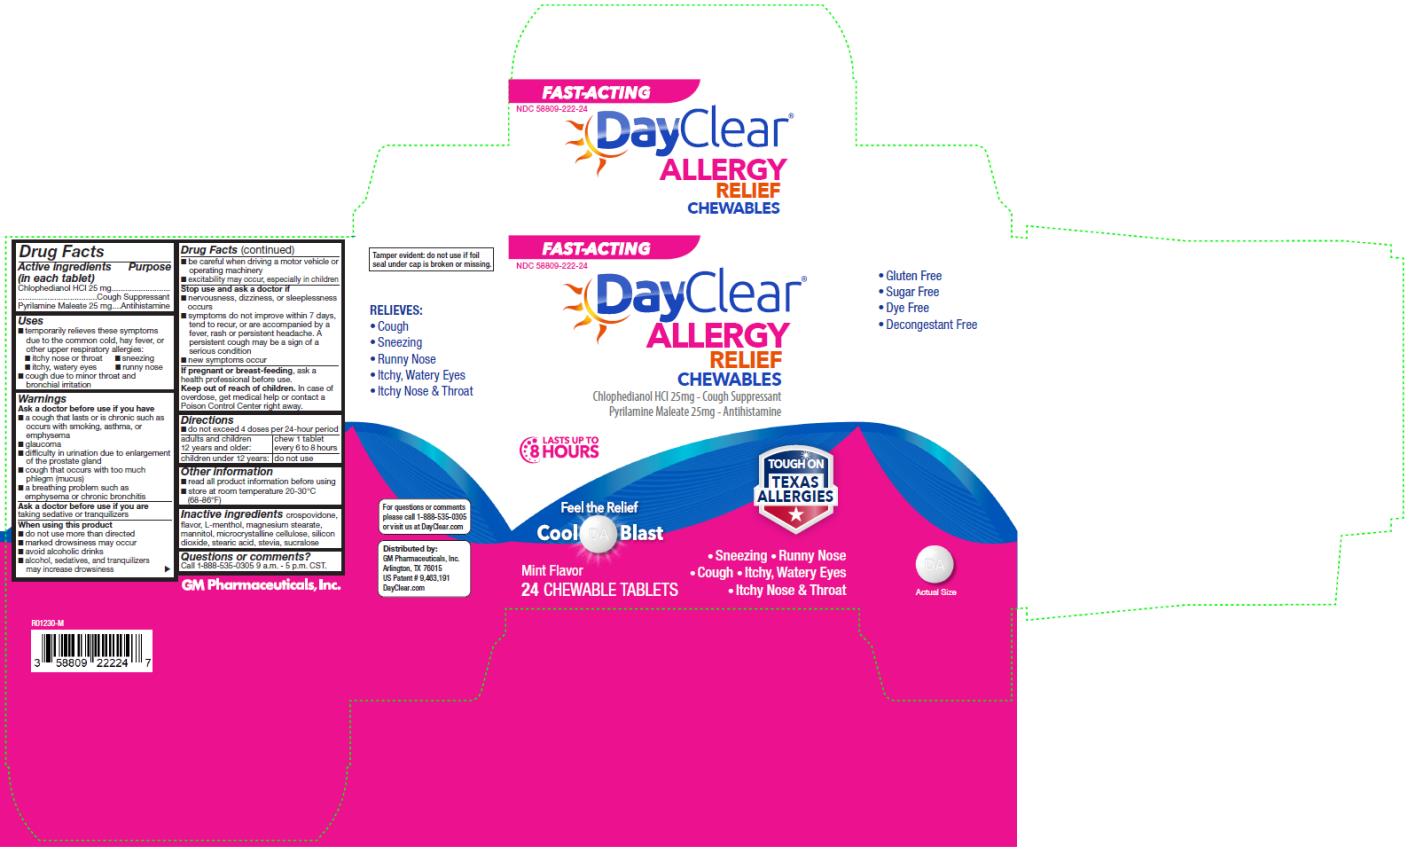 PRINCIPAL DISPLAY PANEL
NDC: <a href=/NDC/58809-222-24>58809-222-24</a>
DayClear
Allergy
Relief
Chewables
24 Chewable Tablets 
